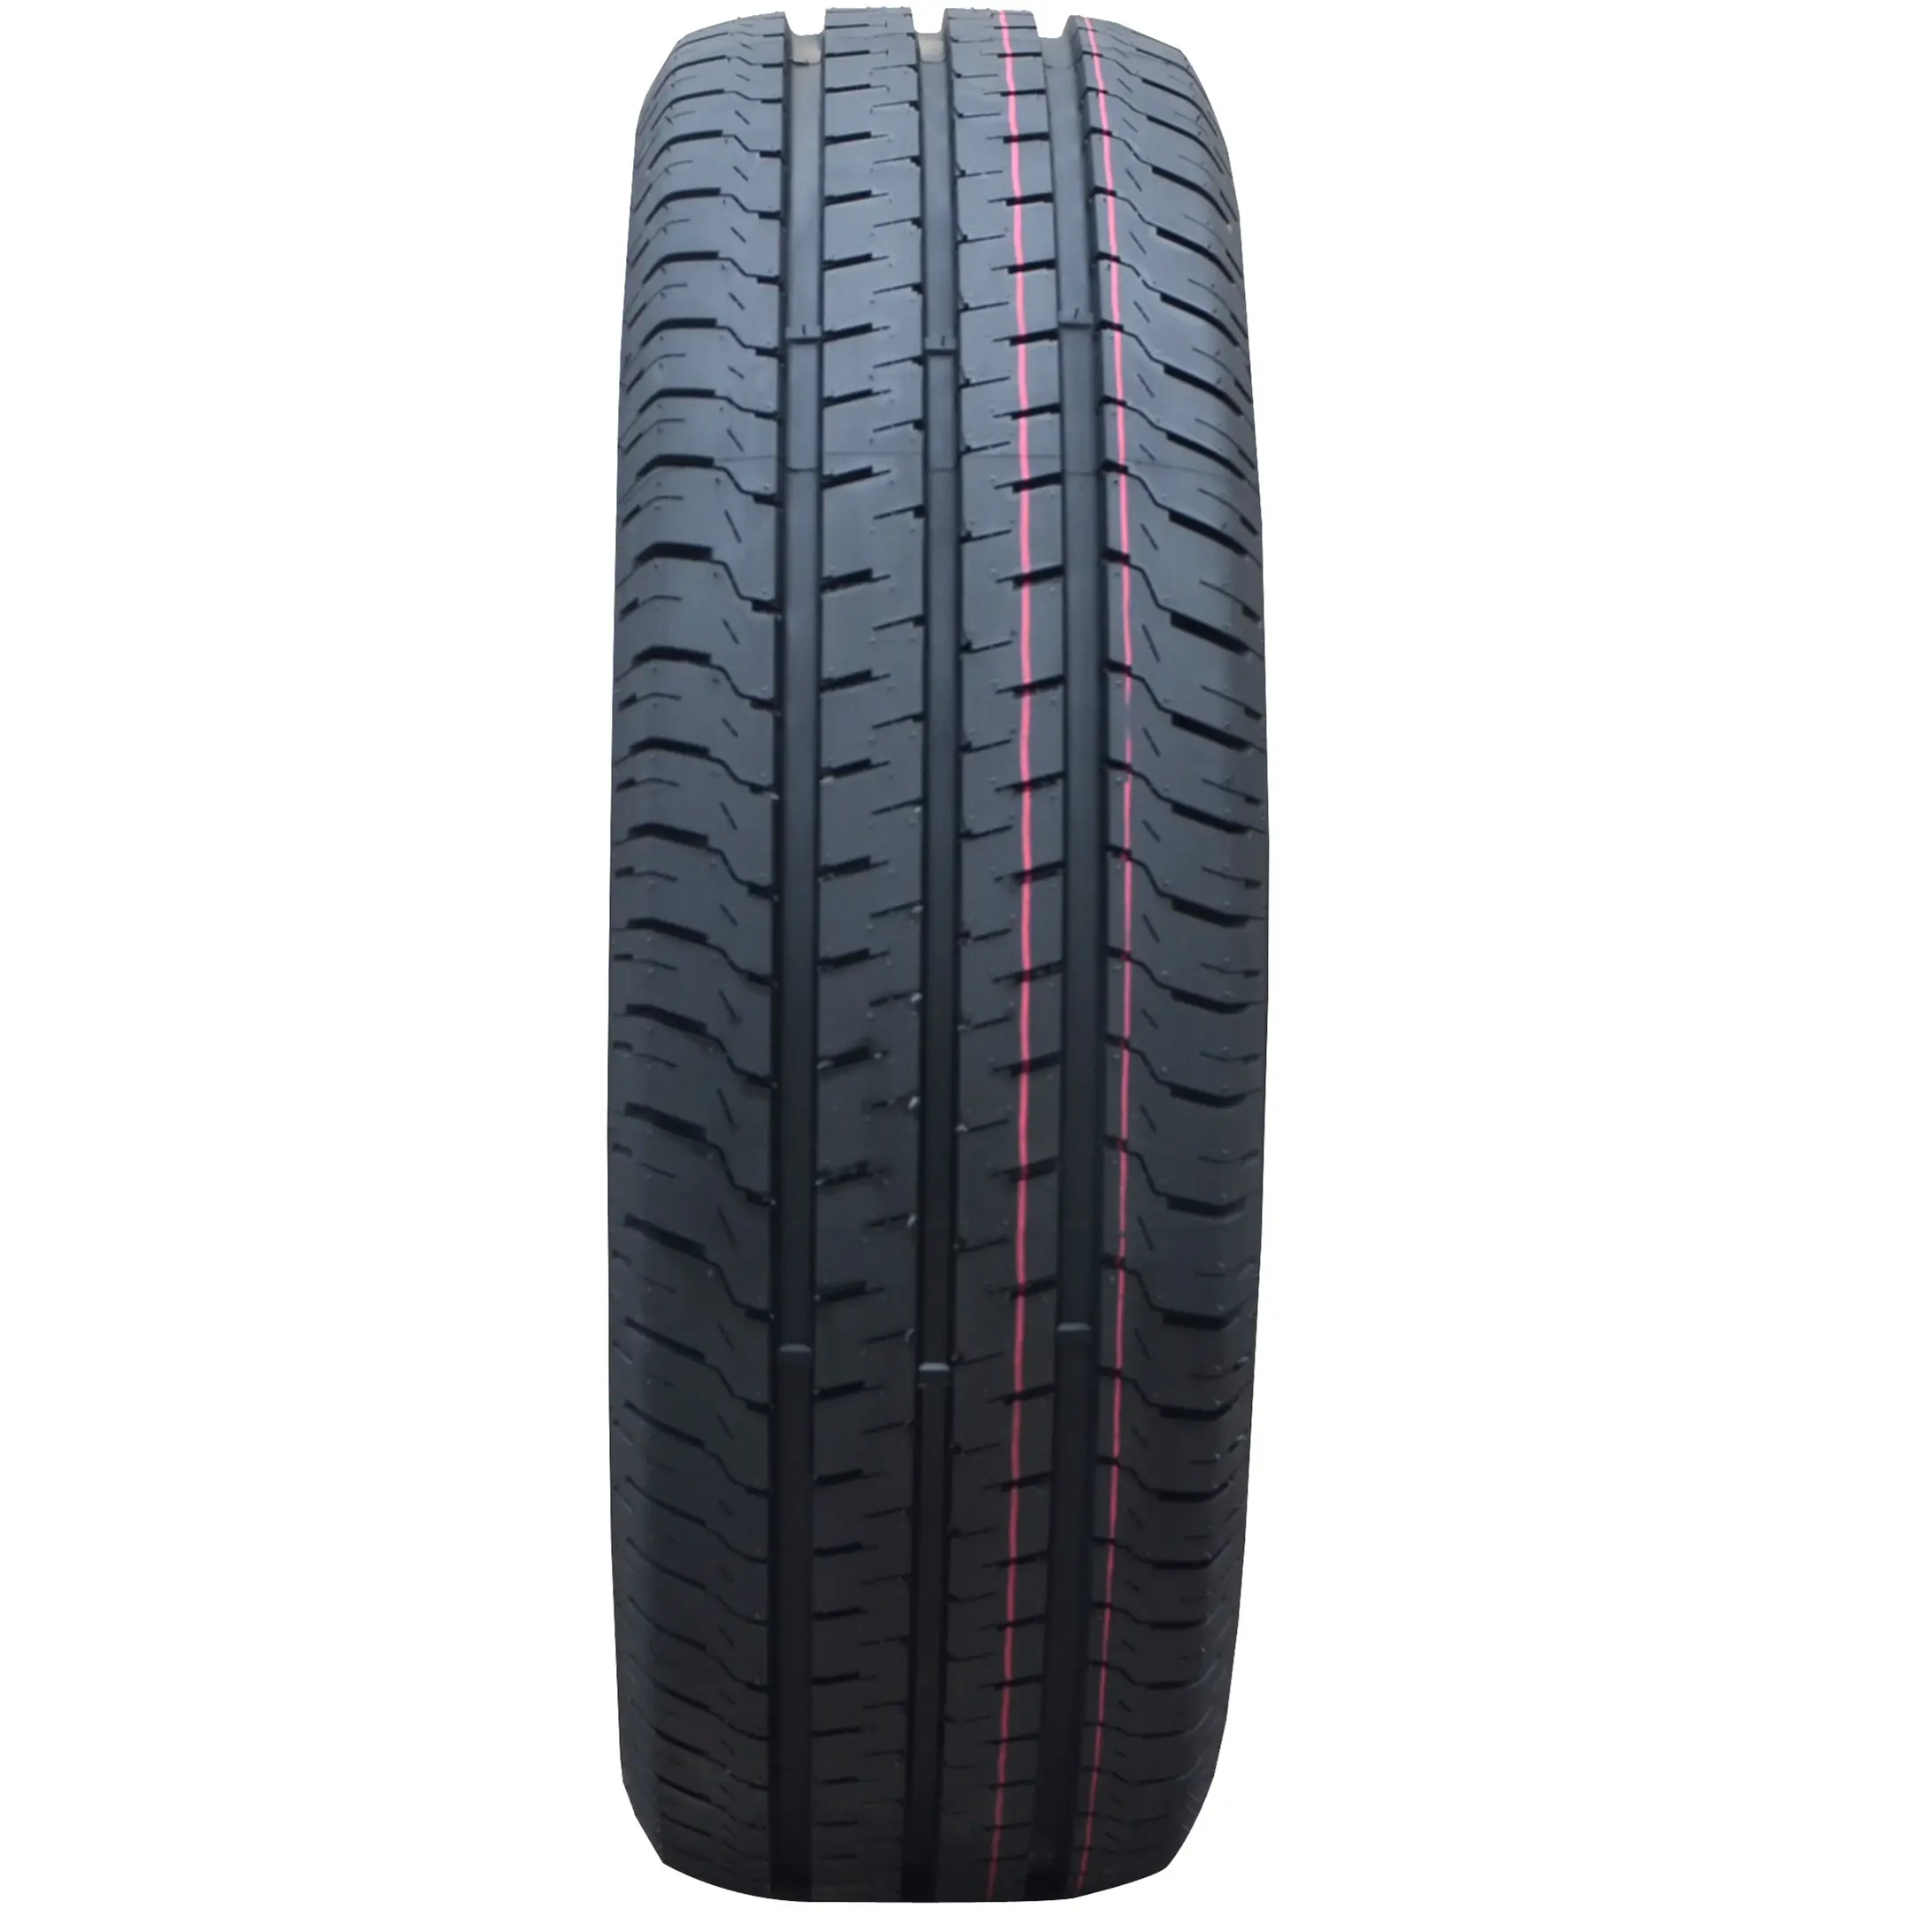 Top 10 China tyre brand LT tyres for Commercial Vehicles Light truck tyre for wholesale R14C R15C cheap prices list